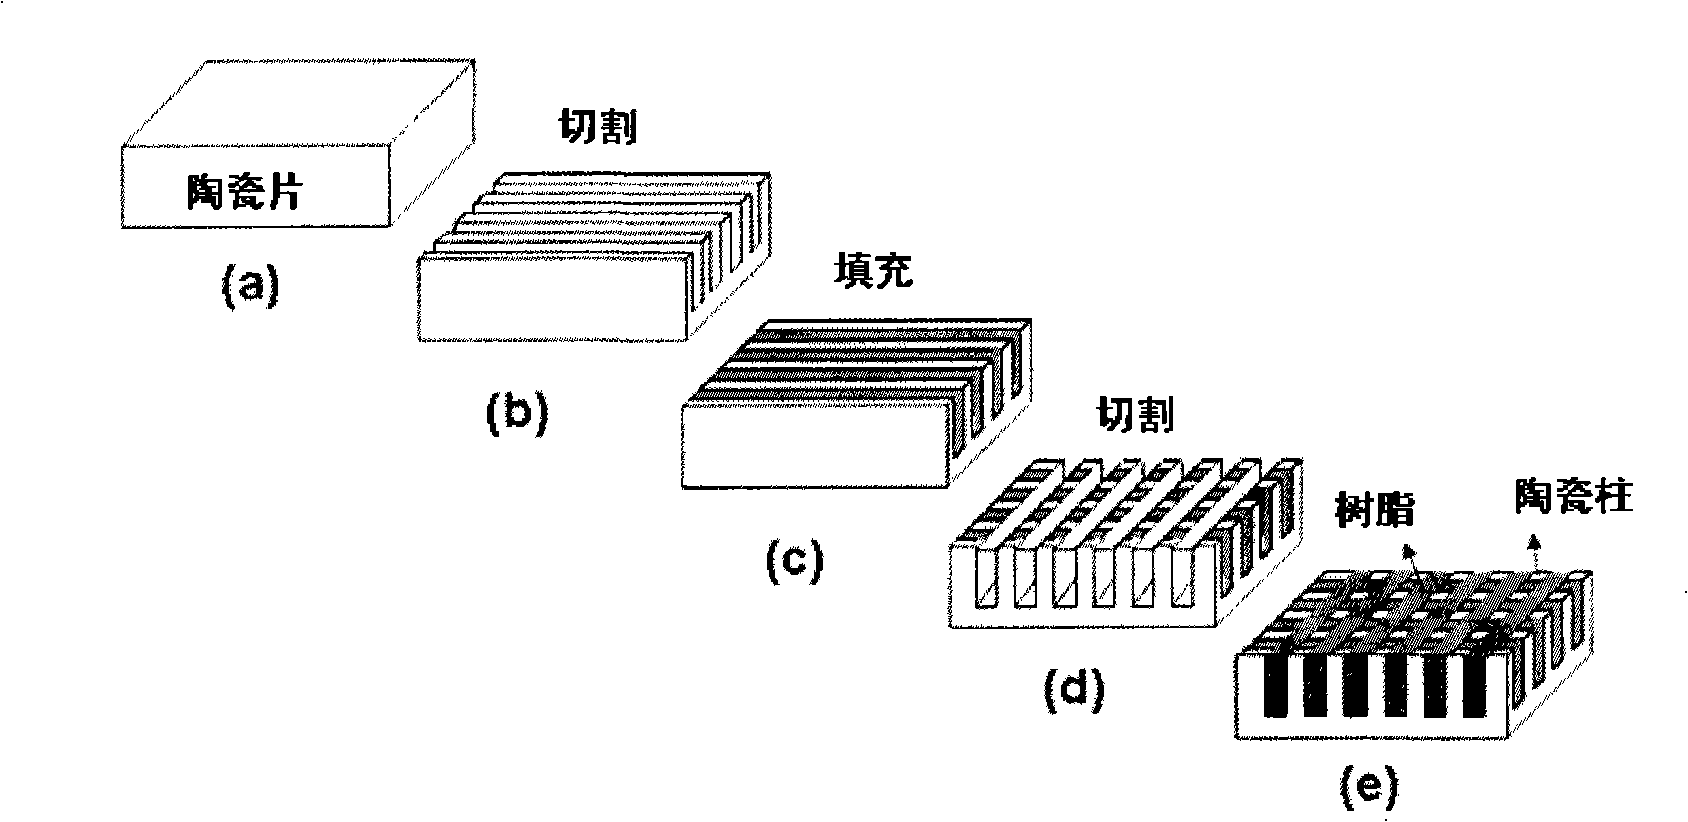 Leadless piezoelectric ceramics/polymer 1-3 structure composite material and method for processing same